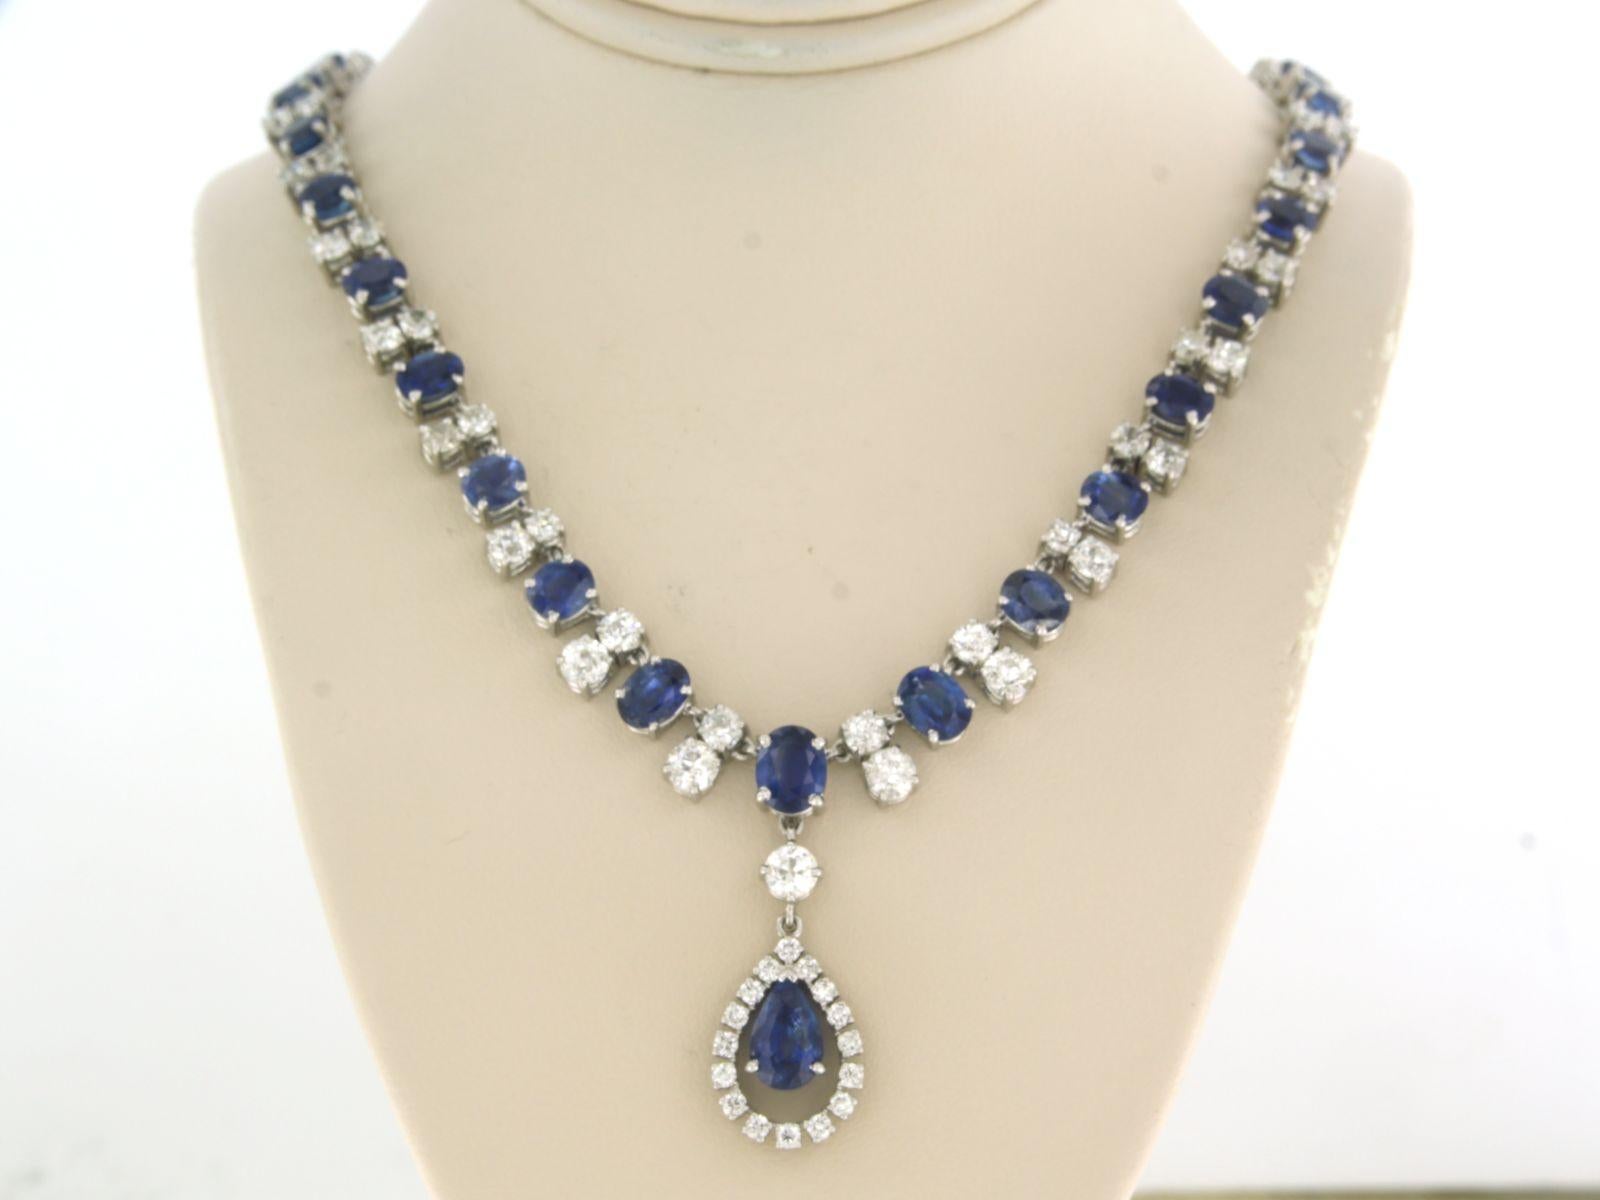 14k white gold necklace set with sapphire to. 10.00ct and old mine cut and brilliant cut diamonds up to. 6.00ct - G/H - VS/SI, SI/Pique - 42 cm long

detailed description

the necklace is 45 cm long and 0.7 mm wide

The size of the center piece is